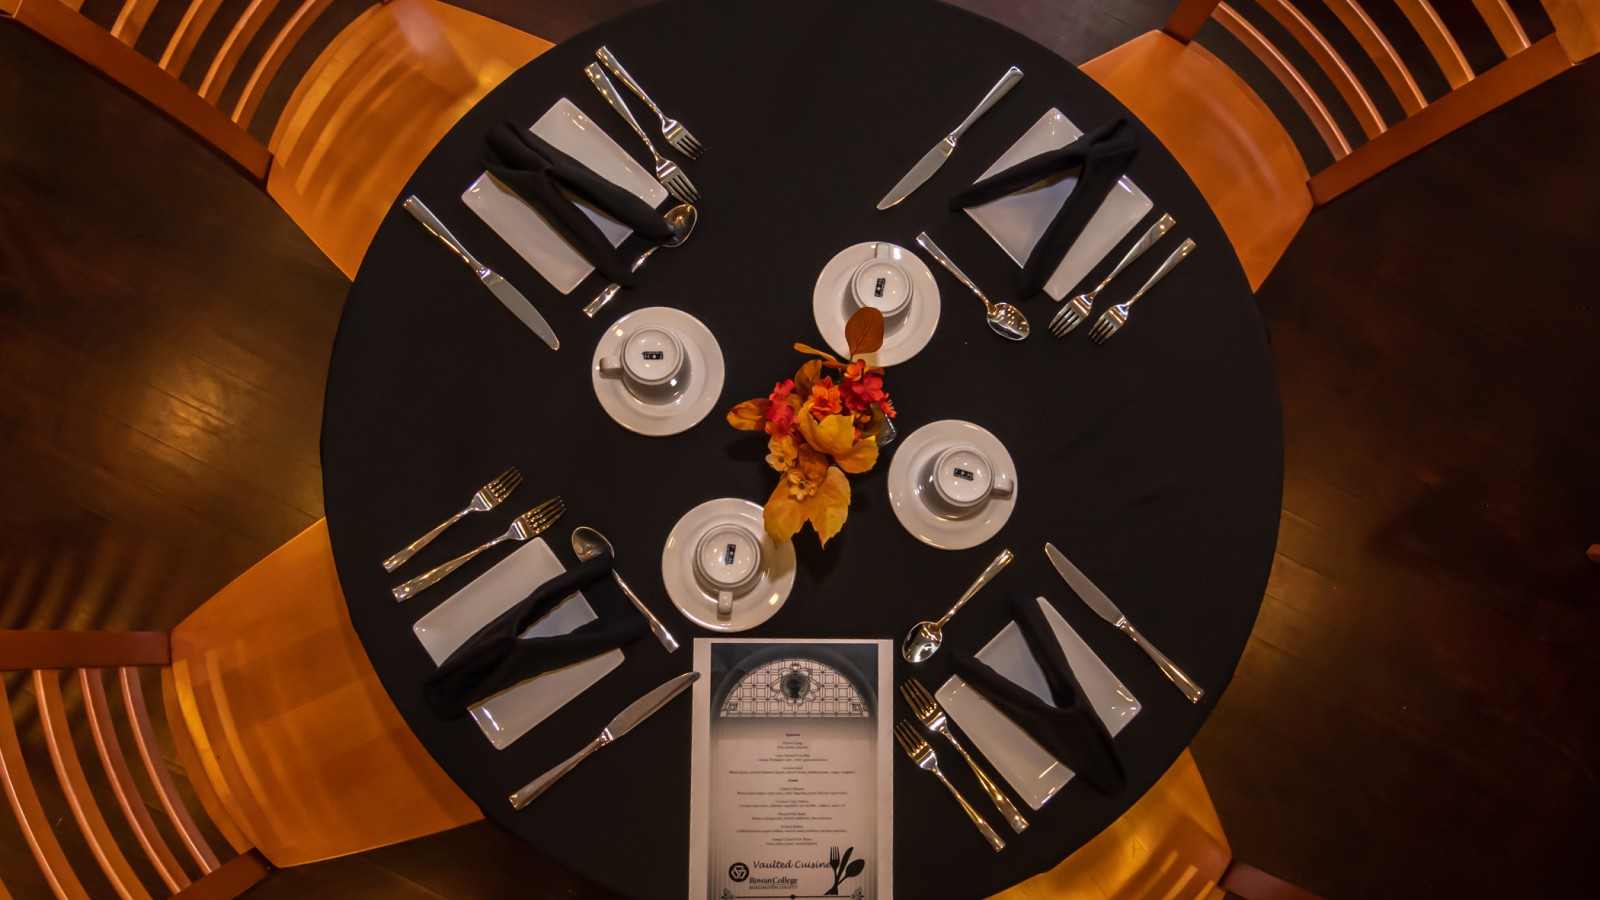 Table setting in the culinary restaurant